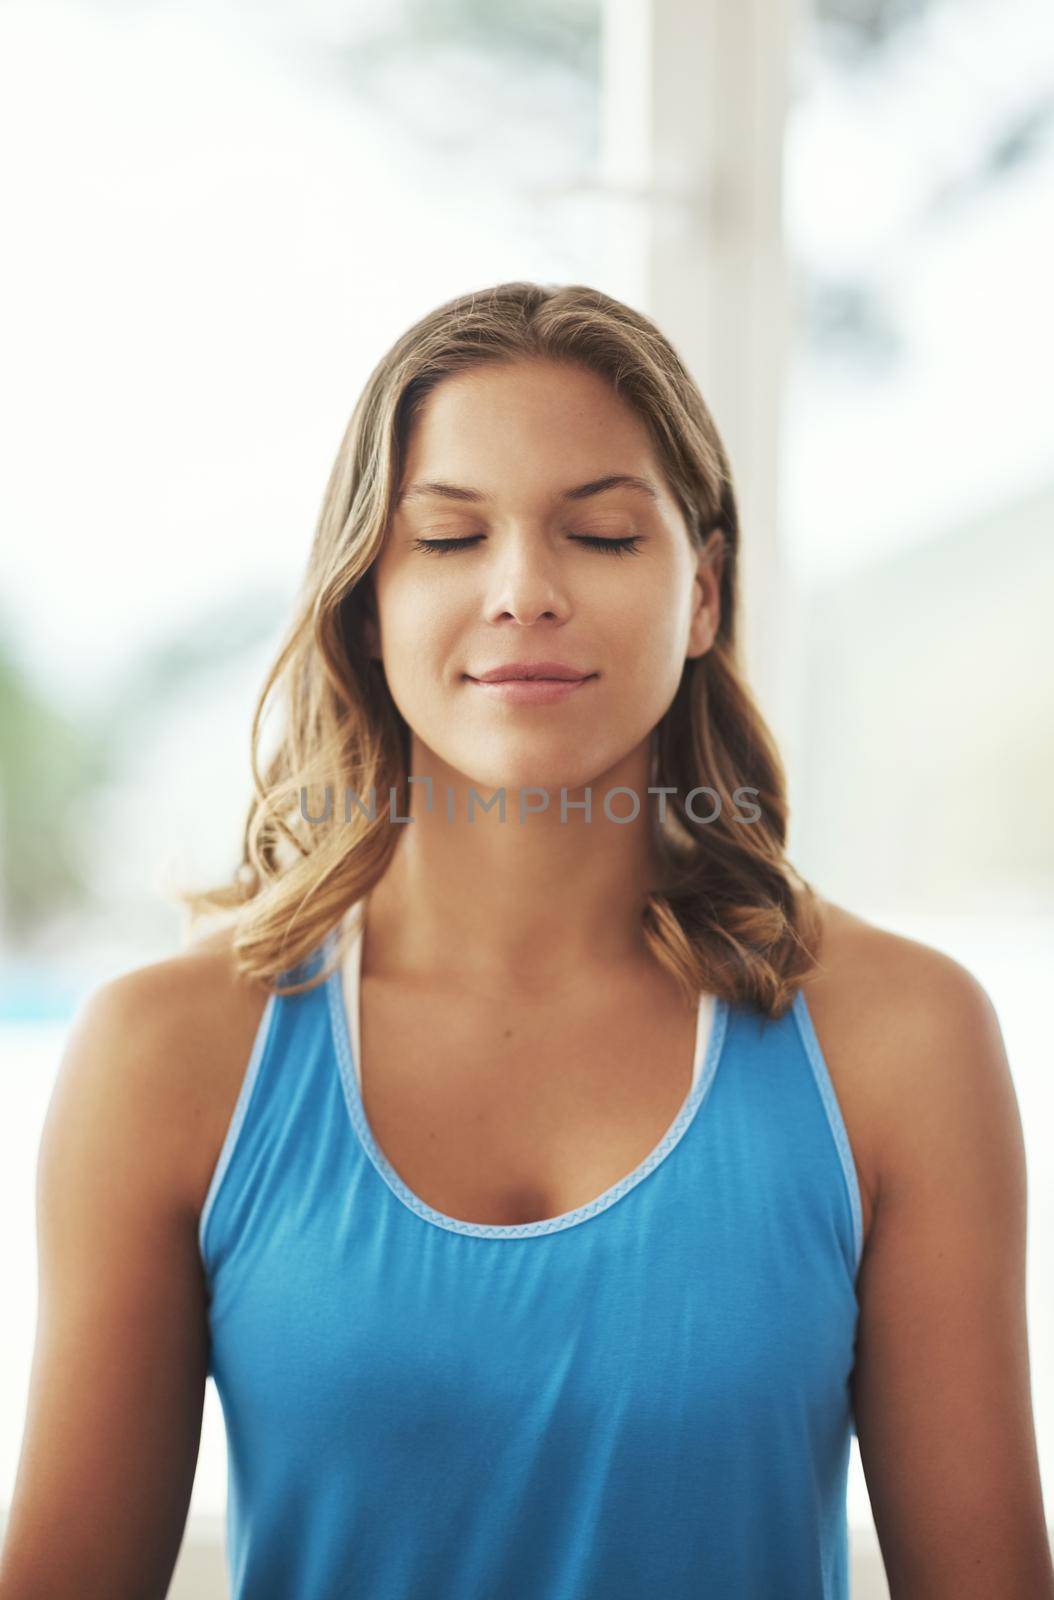 Clearing her mind. a young woman practicing the art of meditation at home